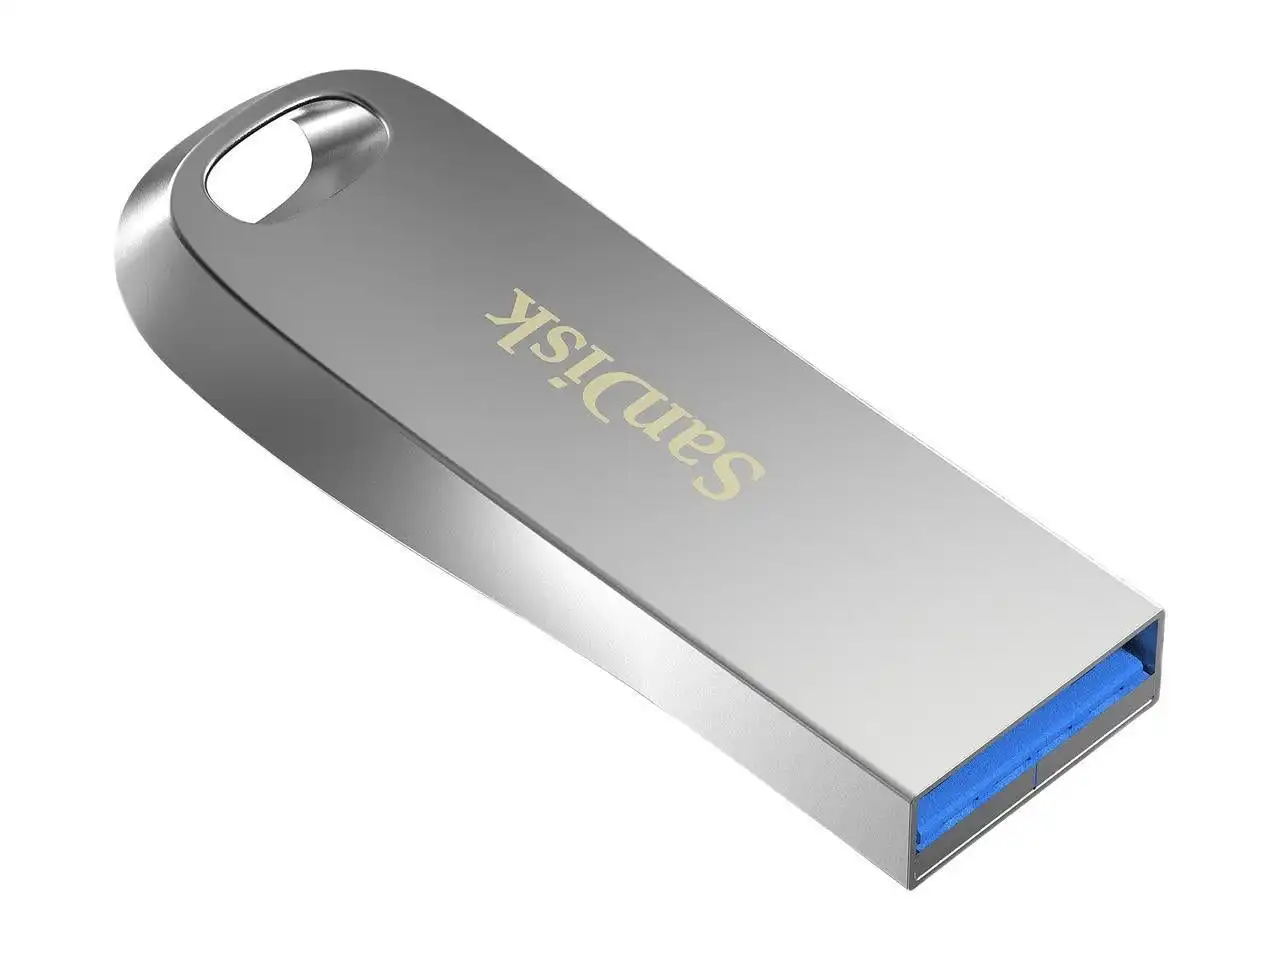 Sandisk Sdcz74 256g G46 256g  Ultra Luxe Pen Drive 150mb Usb 3.0 Metal